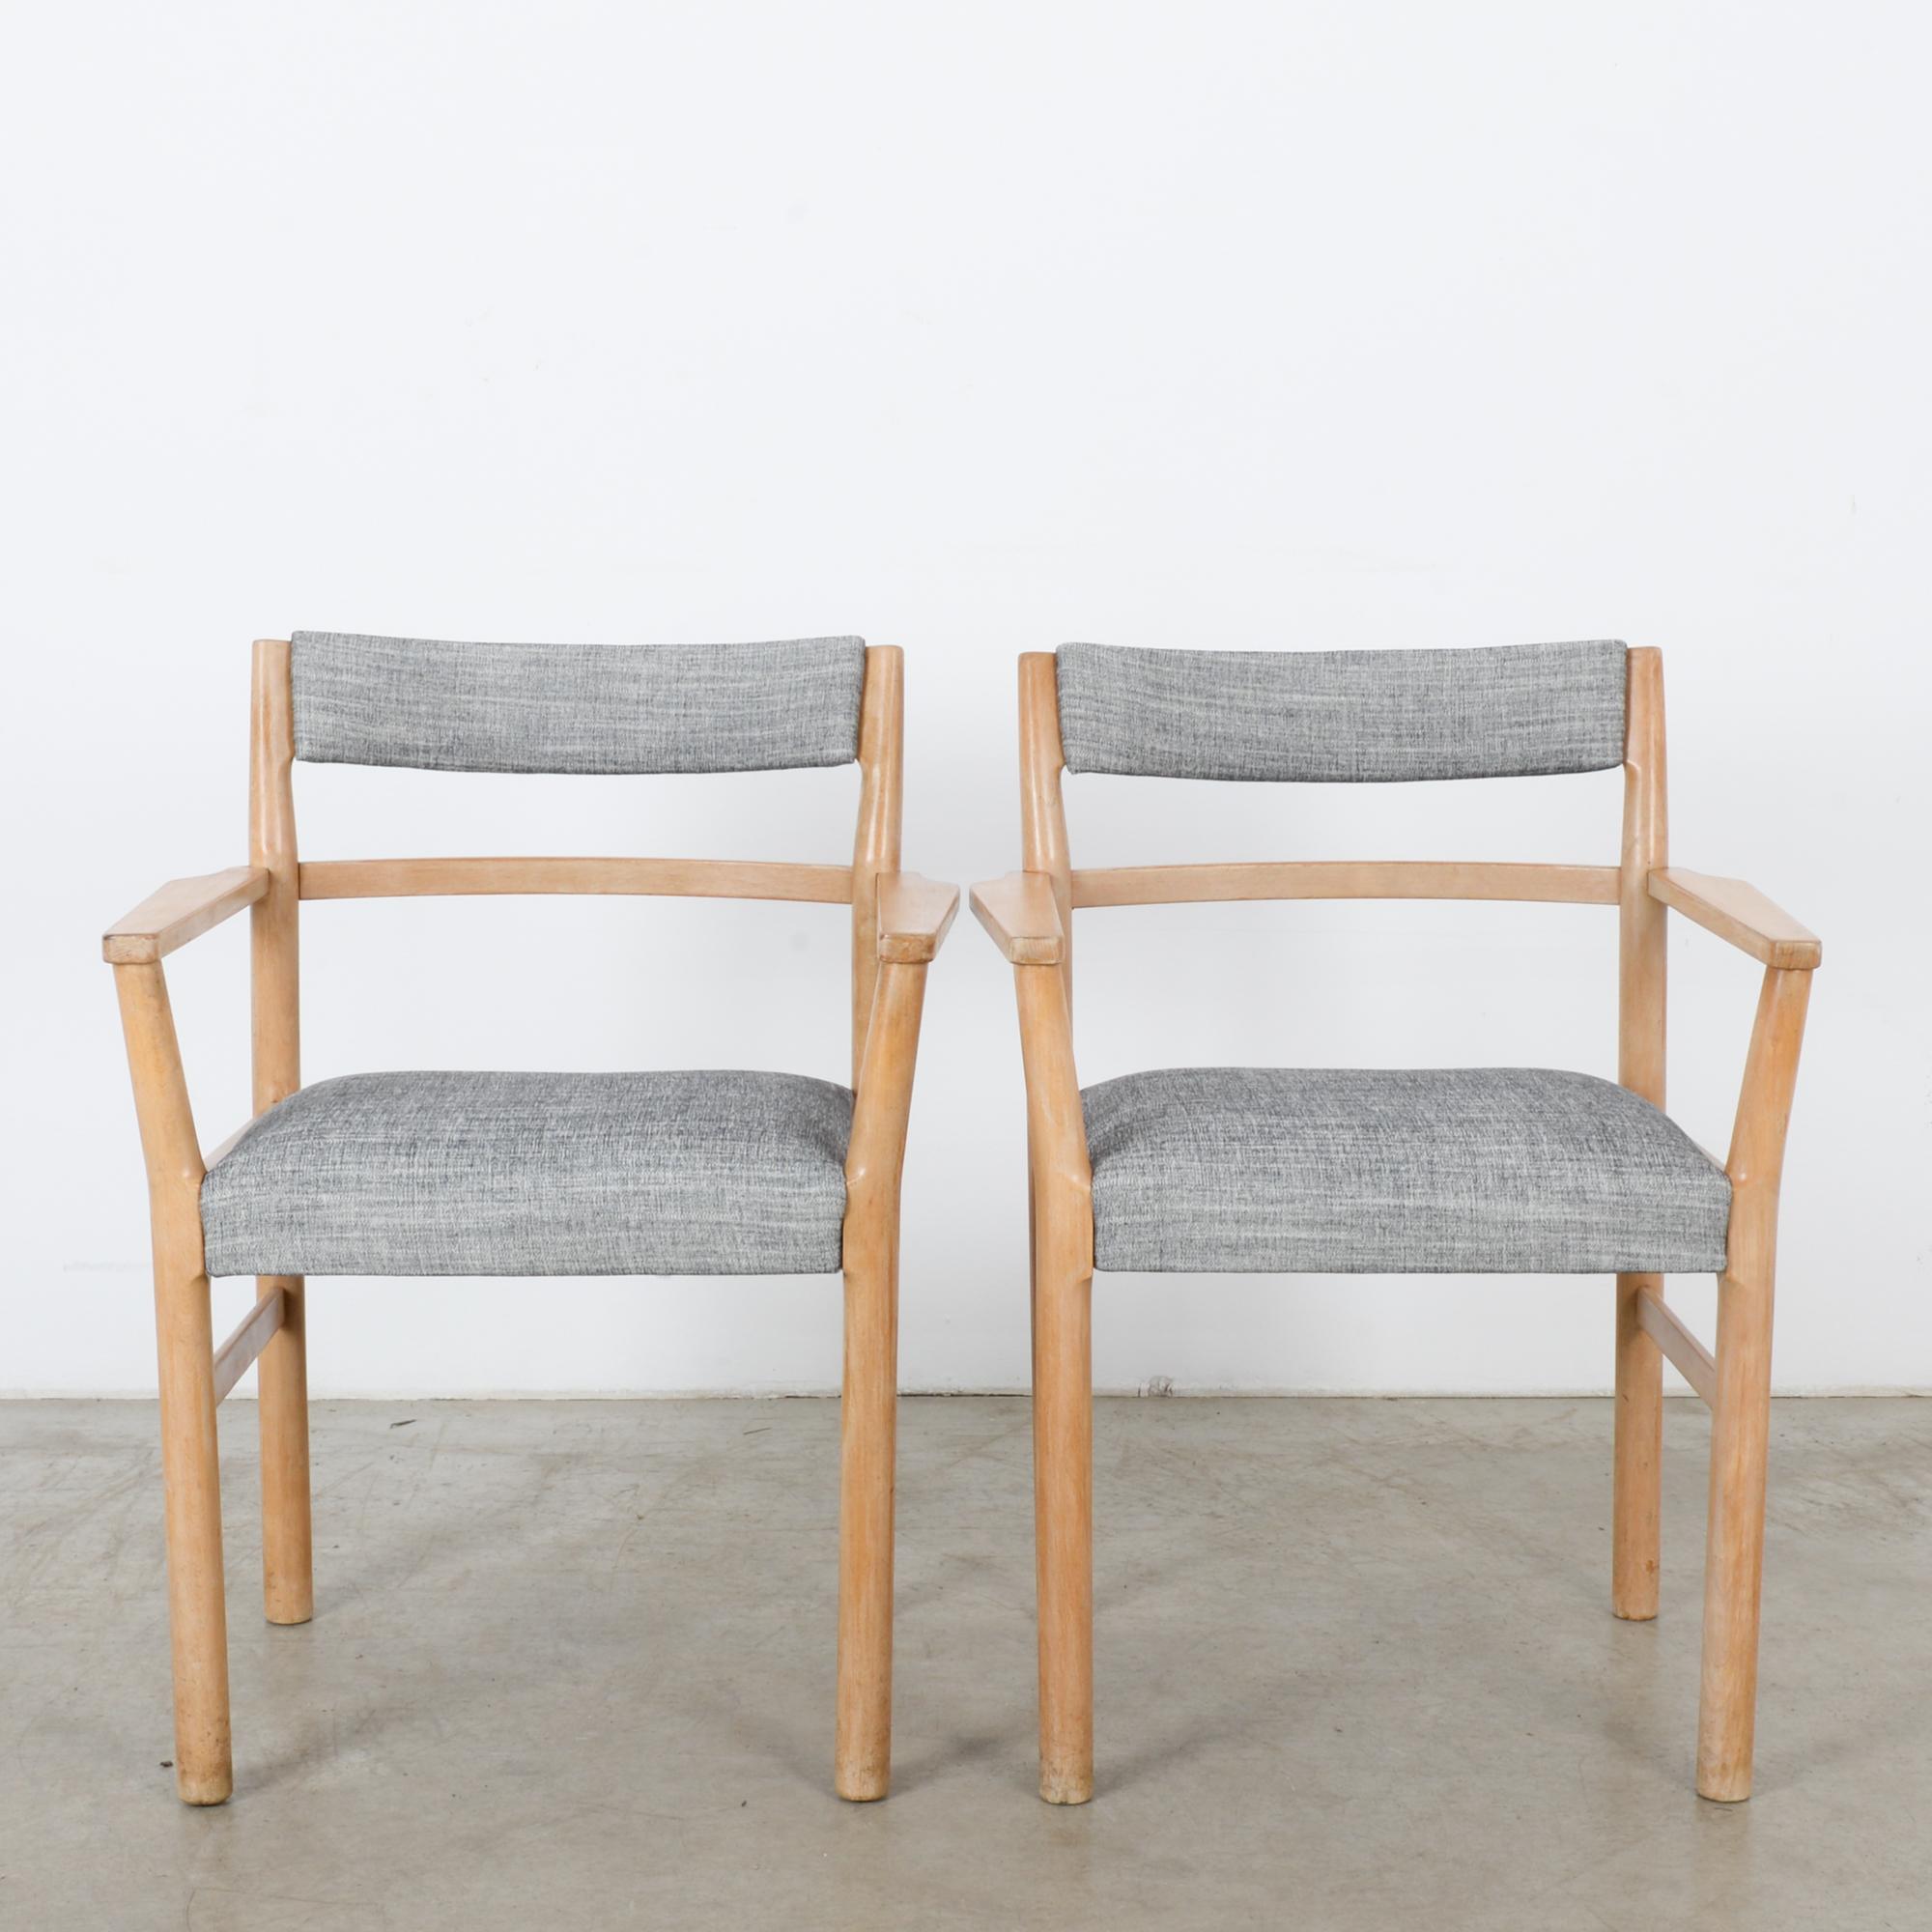 A pair of upholstered armchairs from Denmark, circa 1960. The frame is made of light, sandy wood with a soft polish, and the seat and backrests are upholstered in a gently striated pigeon gray. Broad armrests and a gentle tilt to the backrests